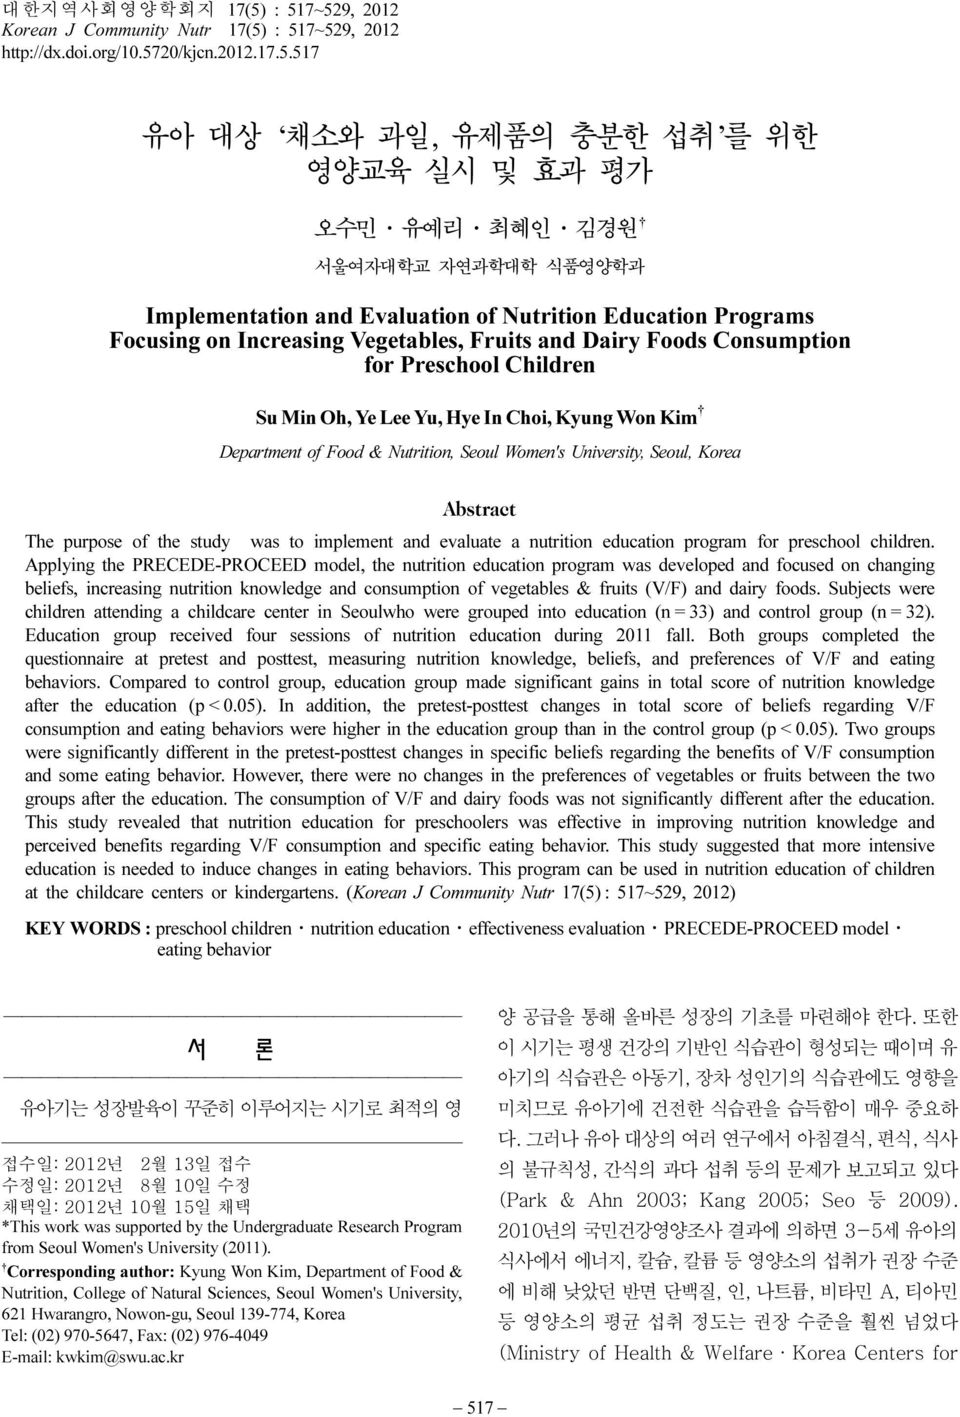 Implementation and Evaluation of Nutrition Education Programs Focusing on Increasing Vegetables, Fruits and Dairy Foods Consumption for Preschool Children Su Min Oh, Ye Lee Yu, Hye In Choi, Kyung Won